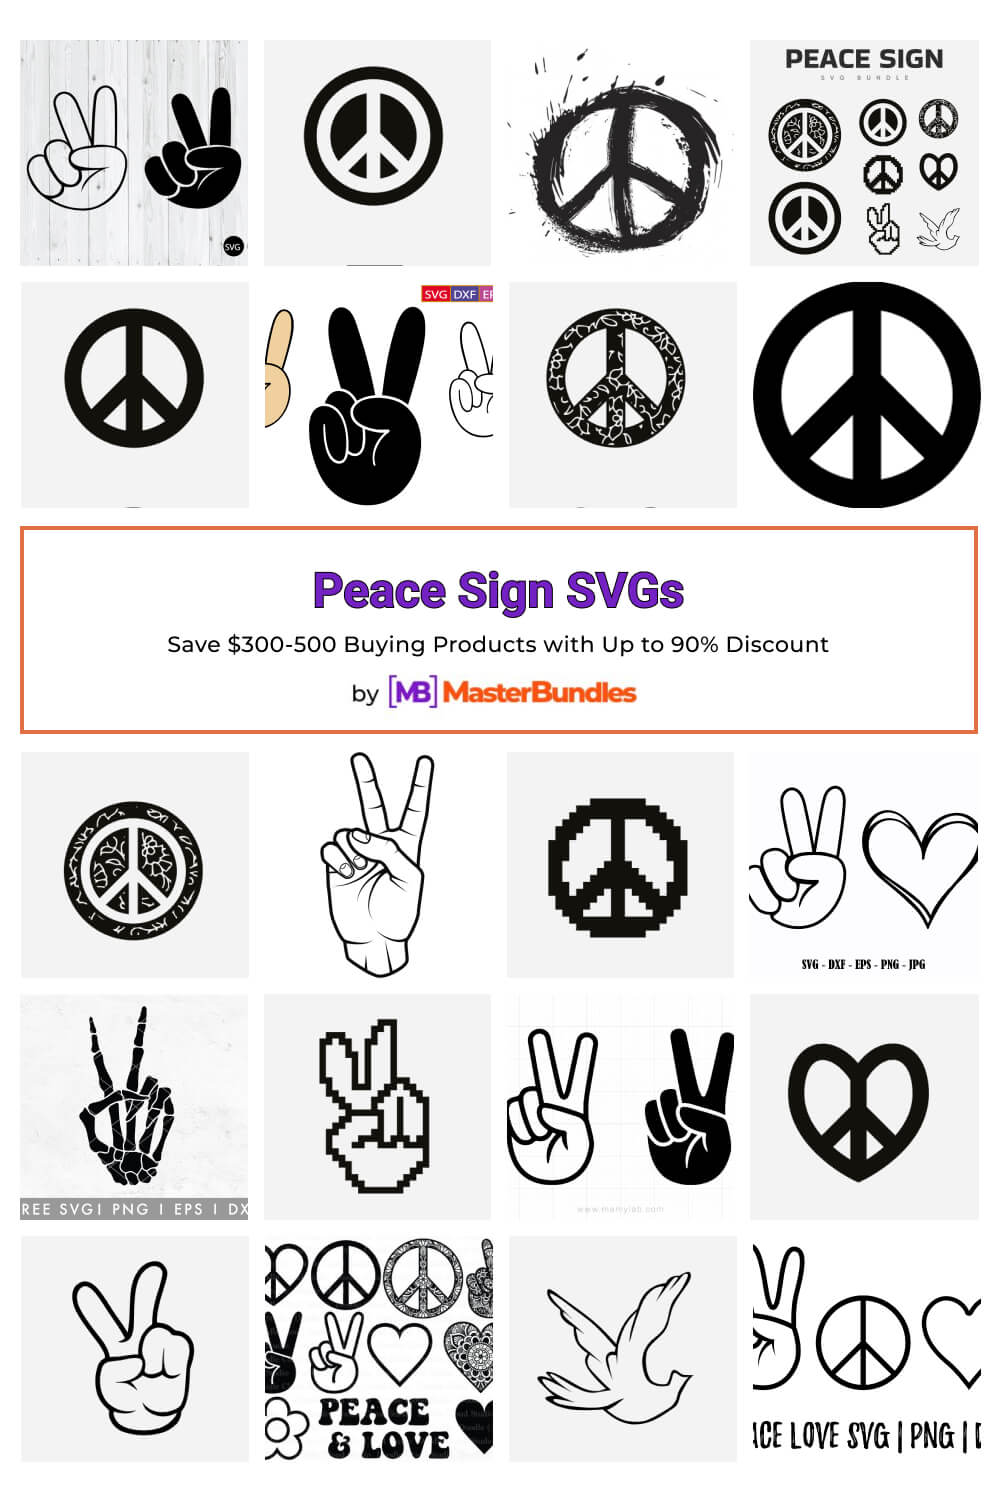 peace sign svgs pinterest image.